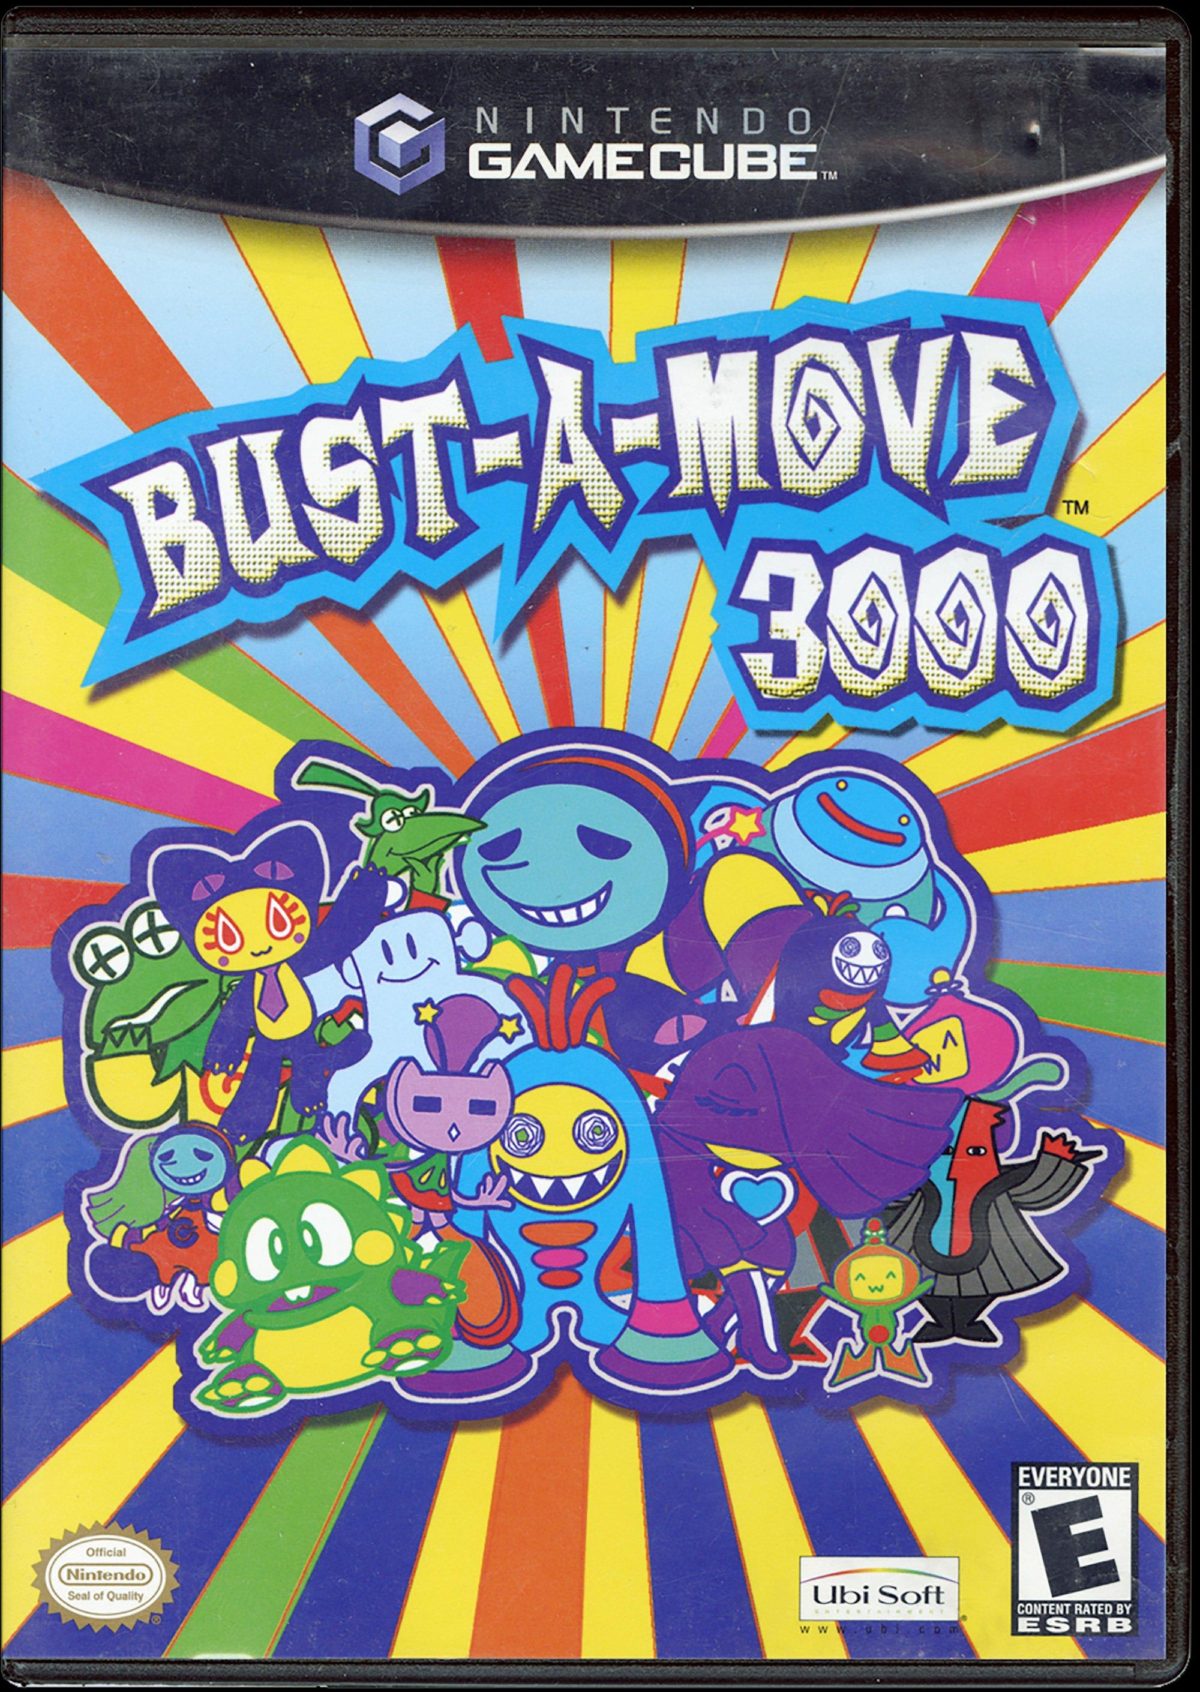 Bust-a-Move 3000 statistics player count facts